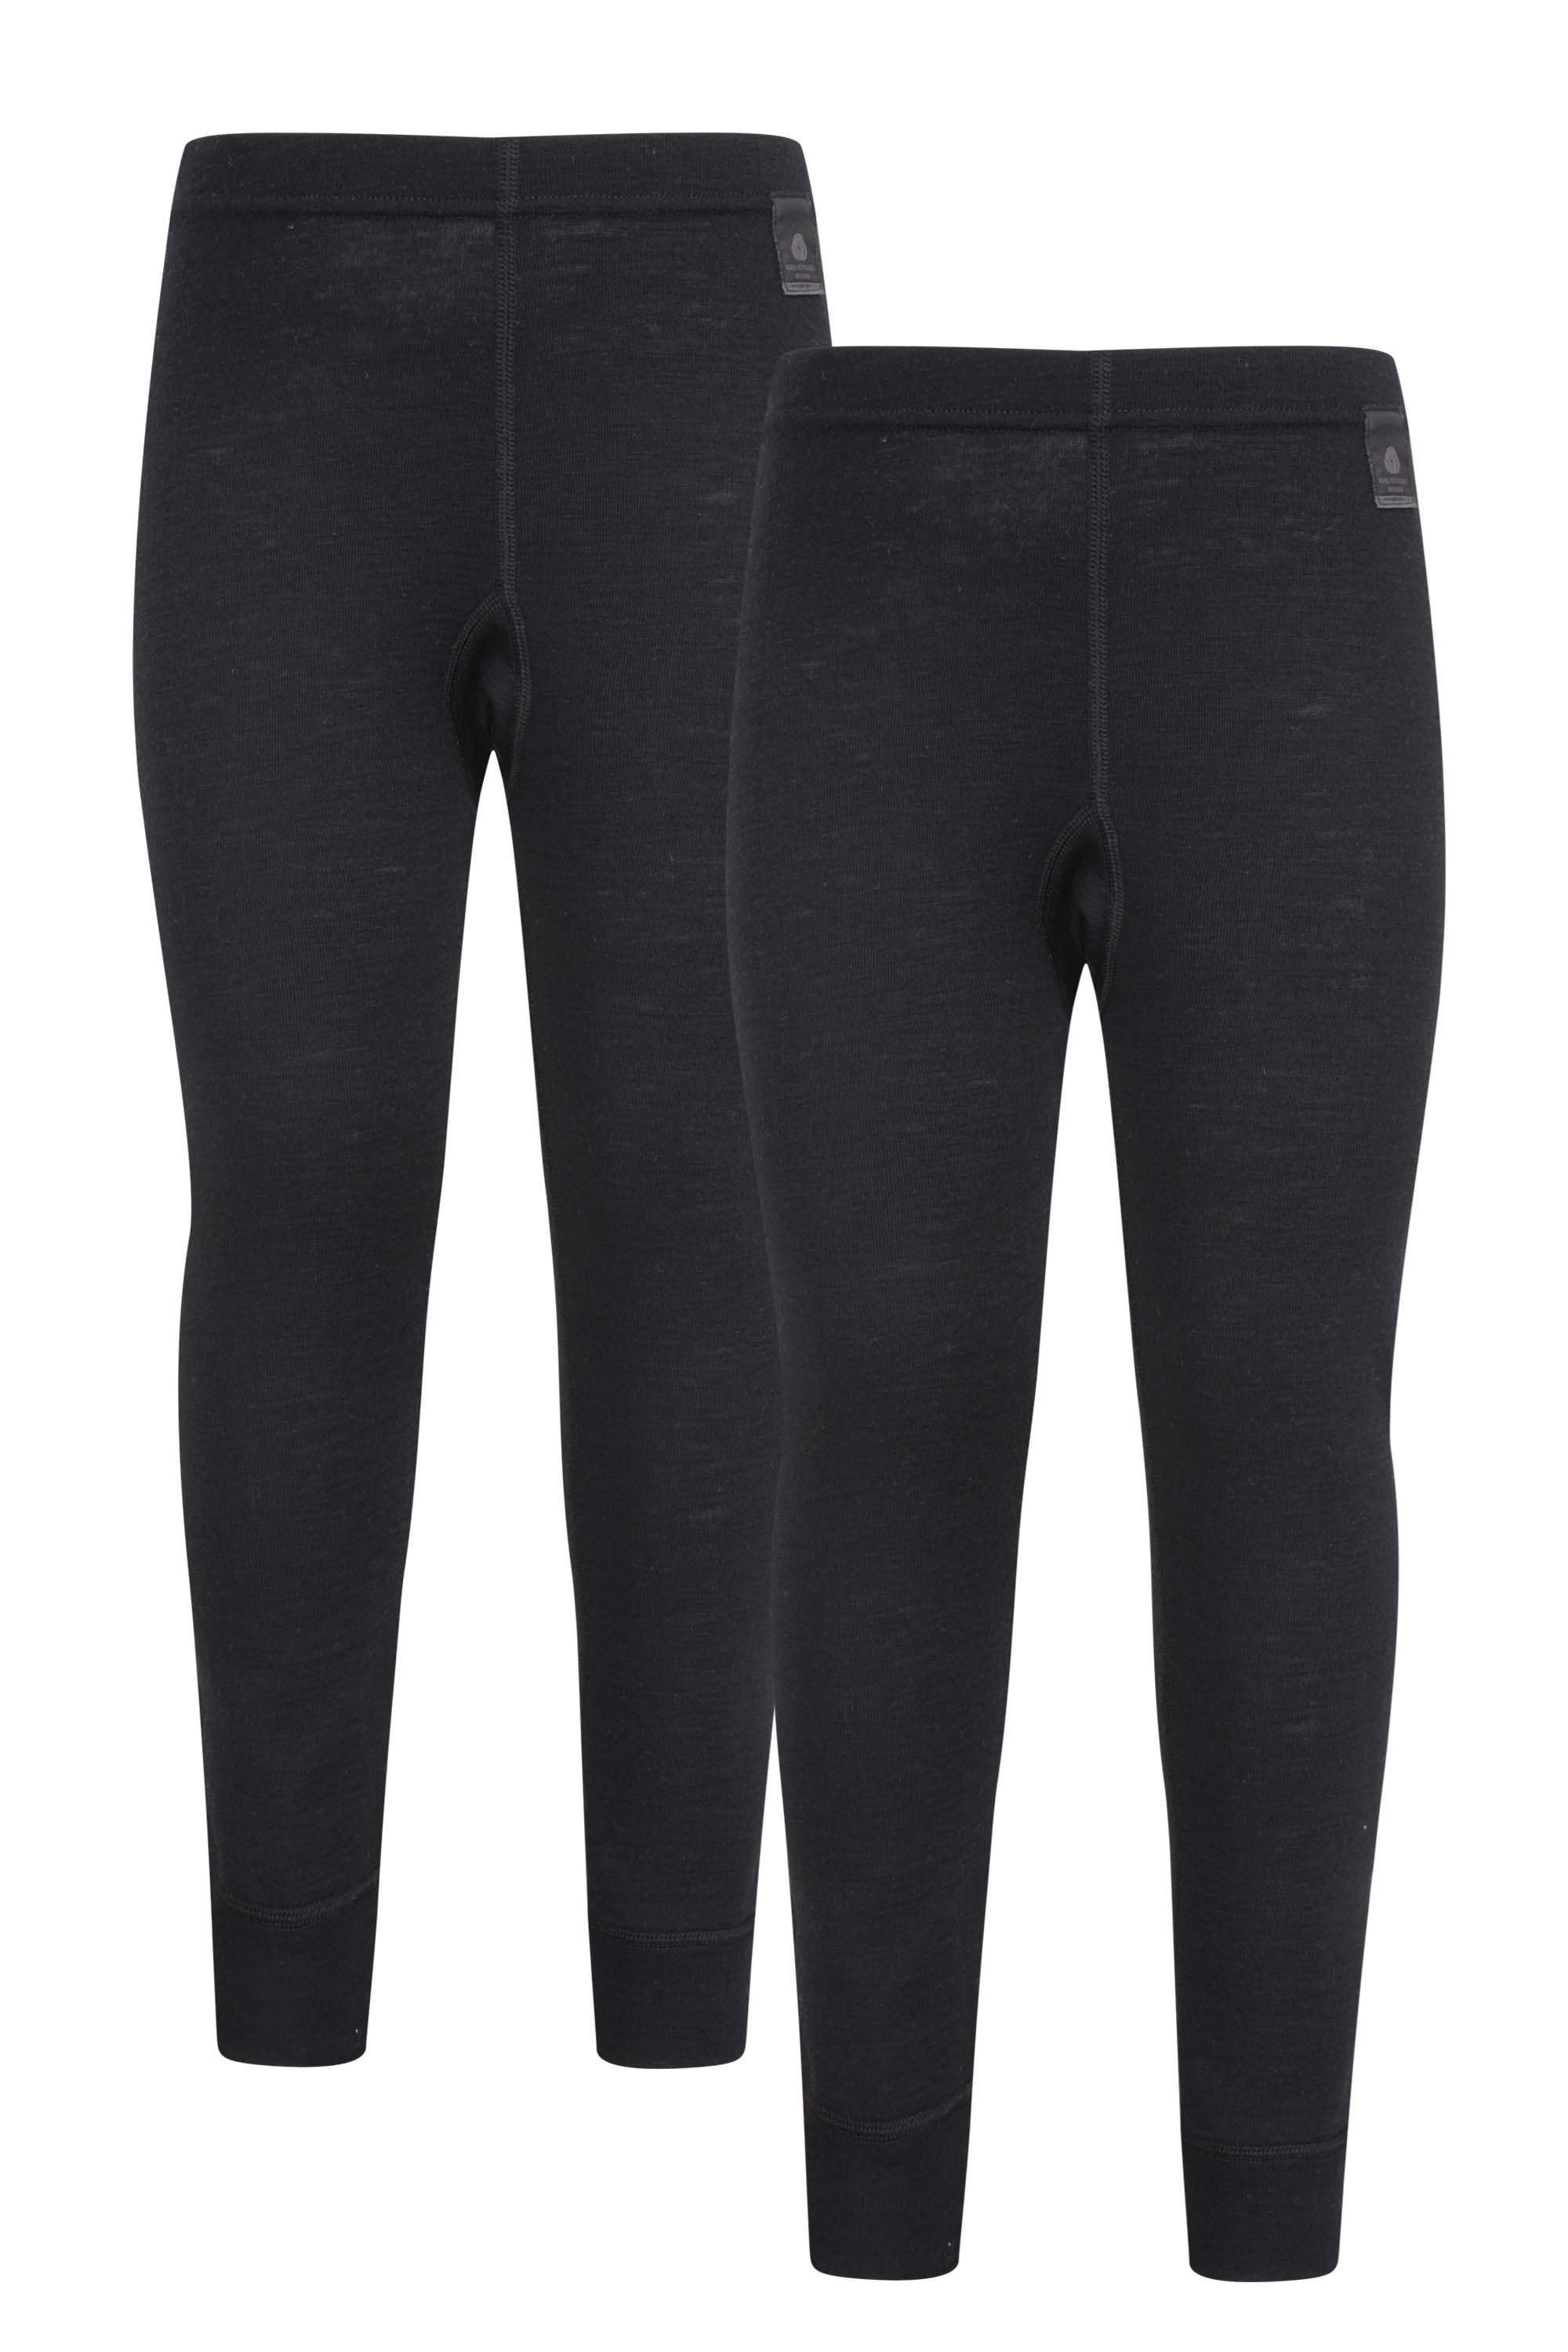 Easy Care -Ideal for Winter Antibacterial Bottoms Breathable High Wicking Lightweight Ladies Trousers Mountain Warehouse Merino Womens Thermal Base Layer Pants 